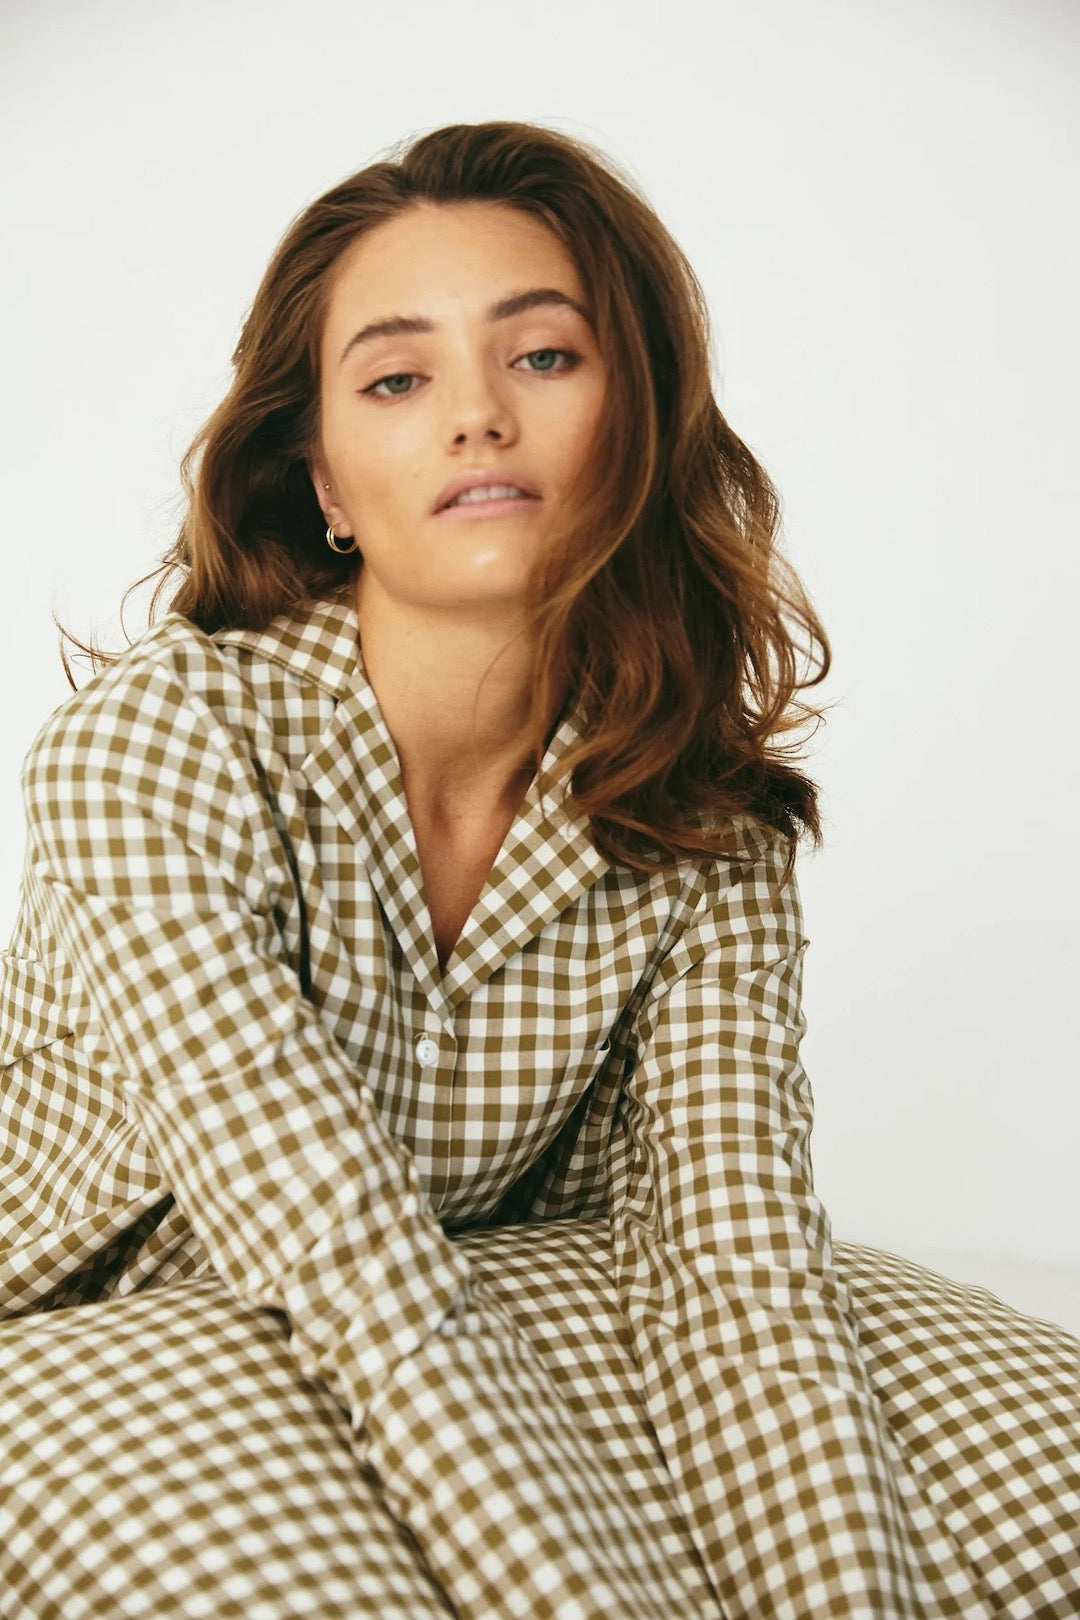 A woman in a Classic Set – Olive Gingham pajama top by general sleep.